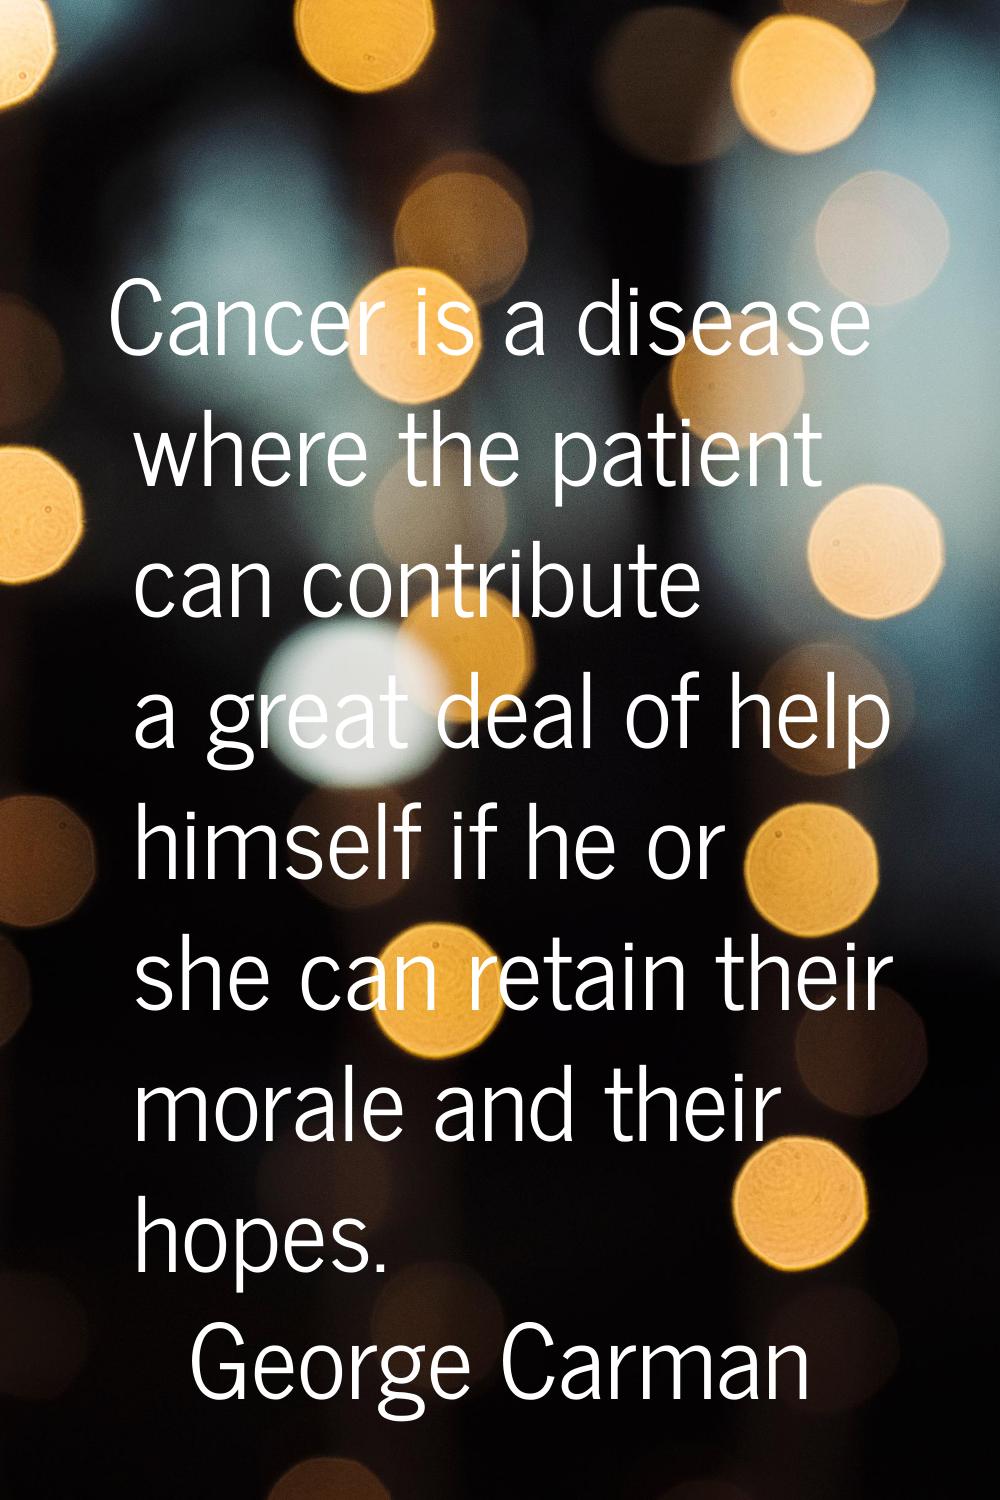 Cancer is a disease where the patient can contribute a great deal of help himself if he or she can 